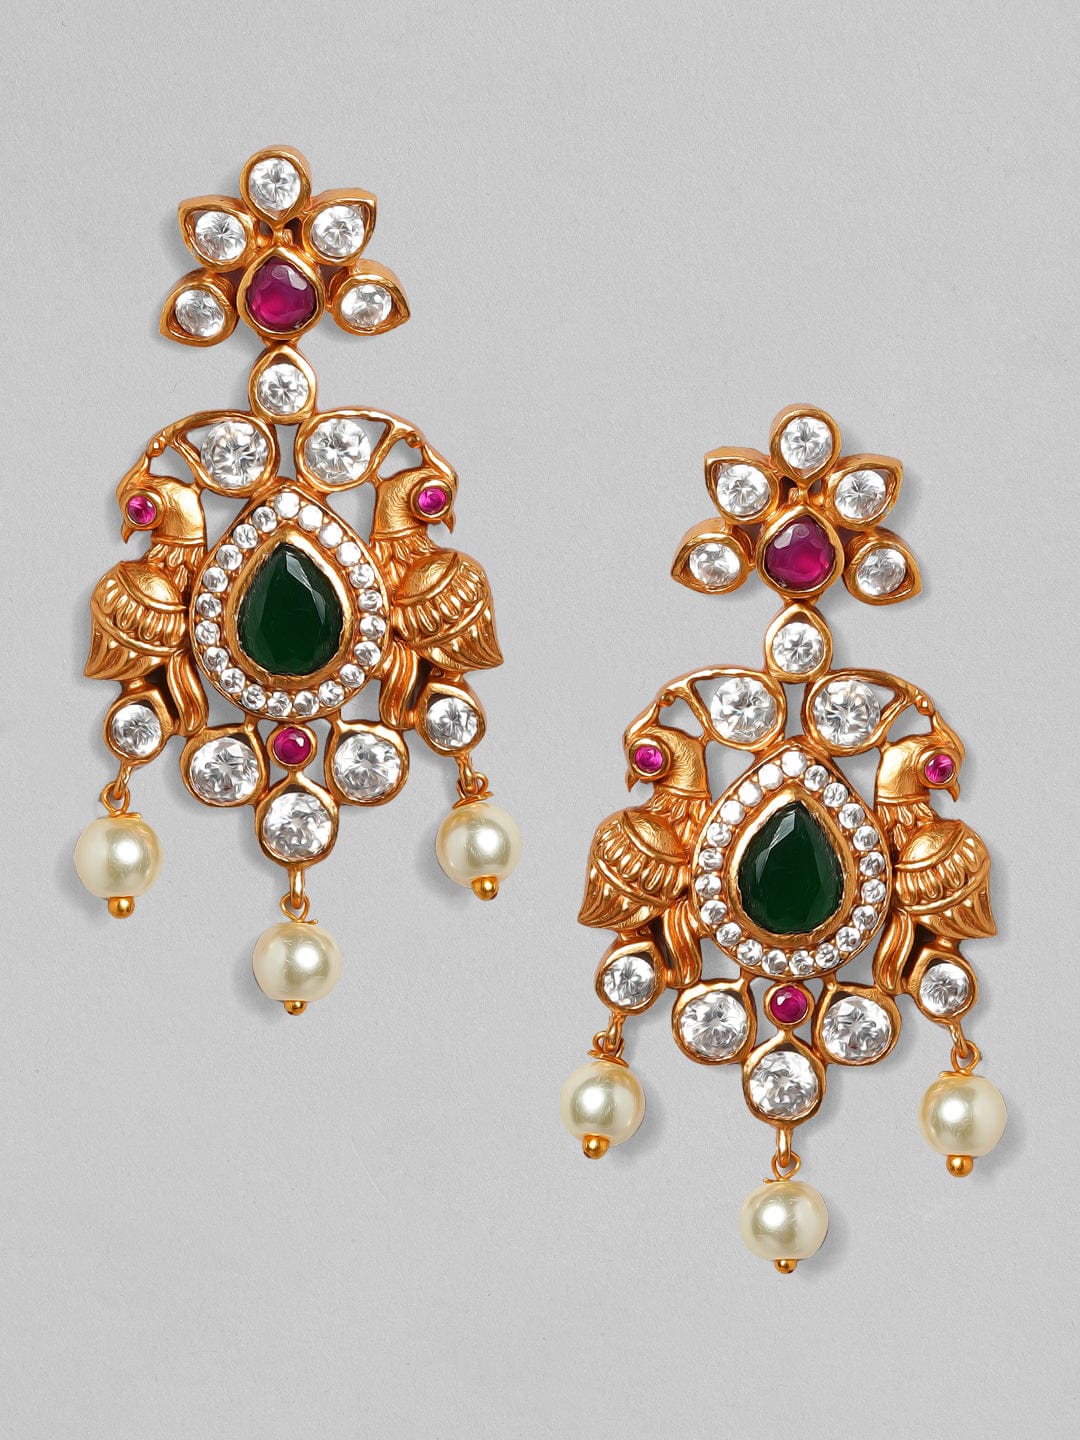 Rubans 22K Gold Plated Handcrafted Faux Ruby with White Pearls Drop Earrings Earrings